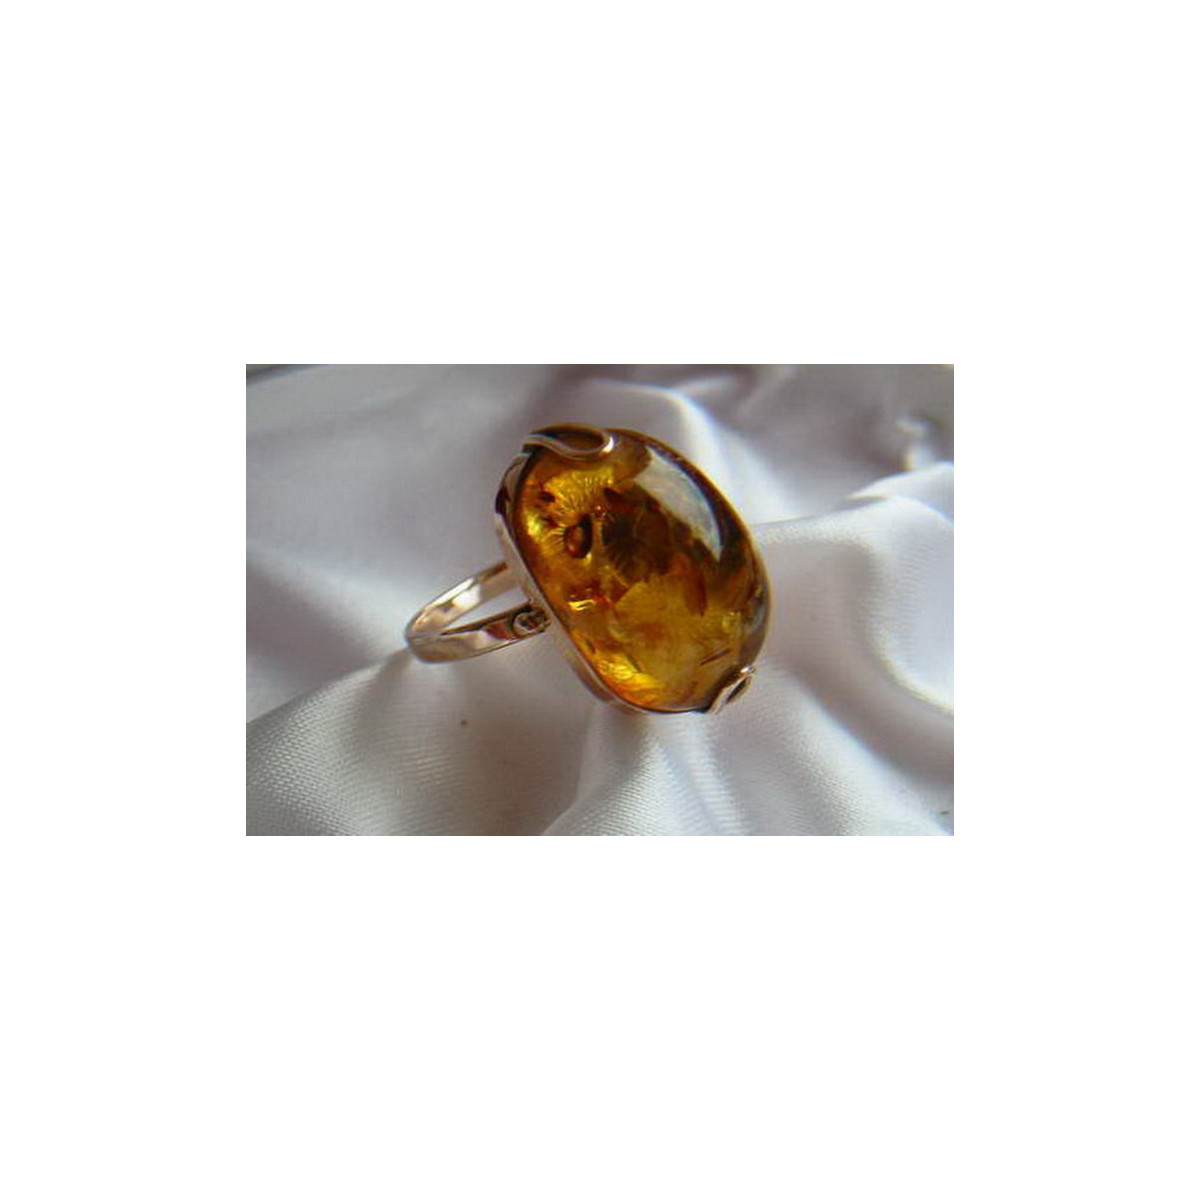 Russian rose Soviet pink USSR red 585 583 gold amber ring vrab030